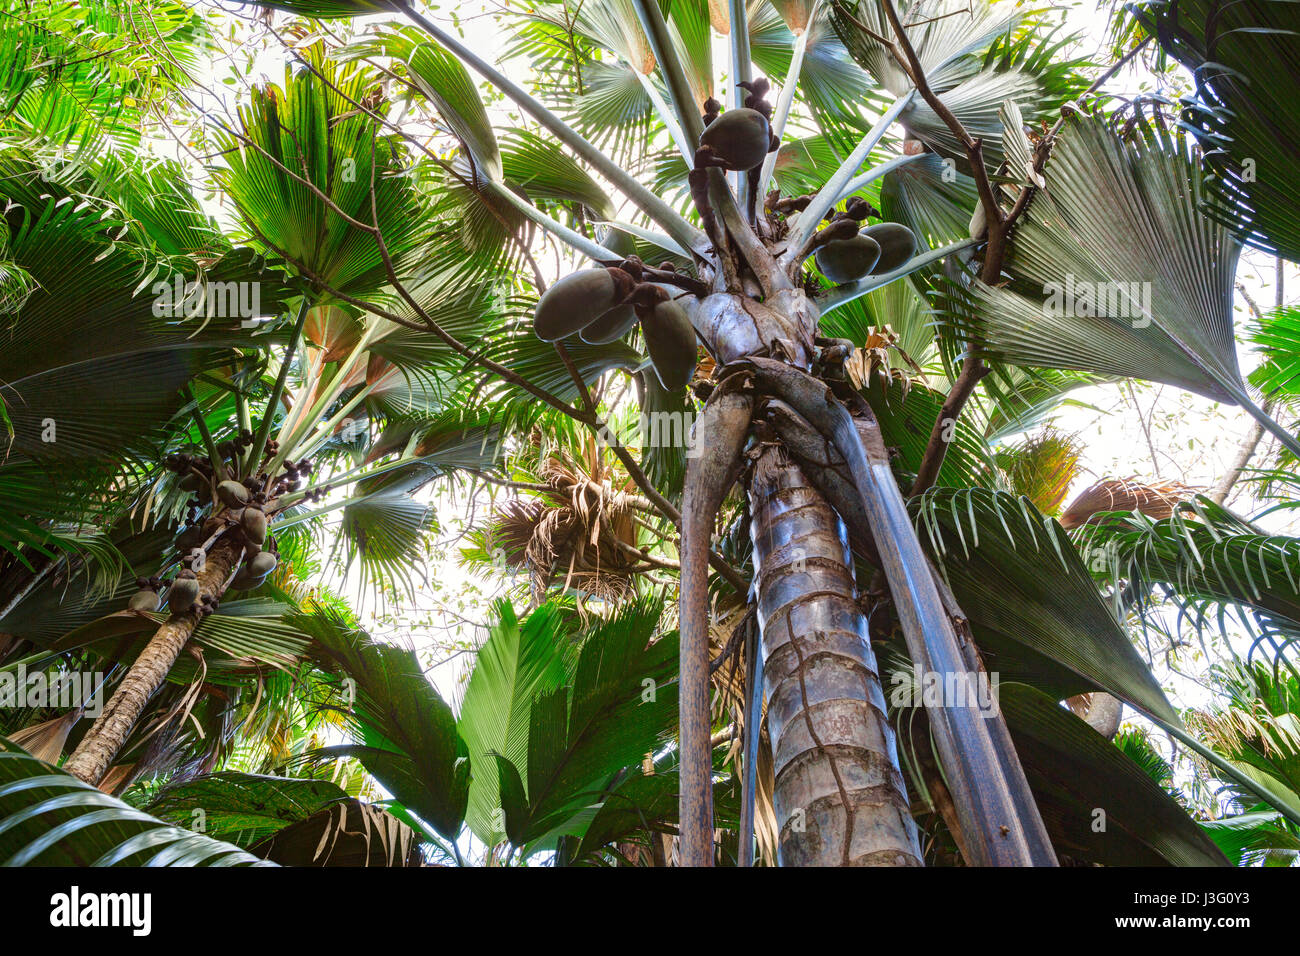 A view from below upwards on the  Coco de Mer palm trees. The Vallee De Mai palm forest, Praslin island, Seychelles. Stock Photo